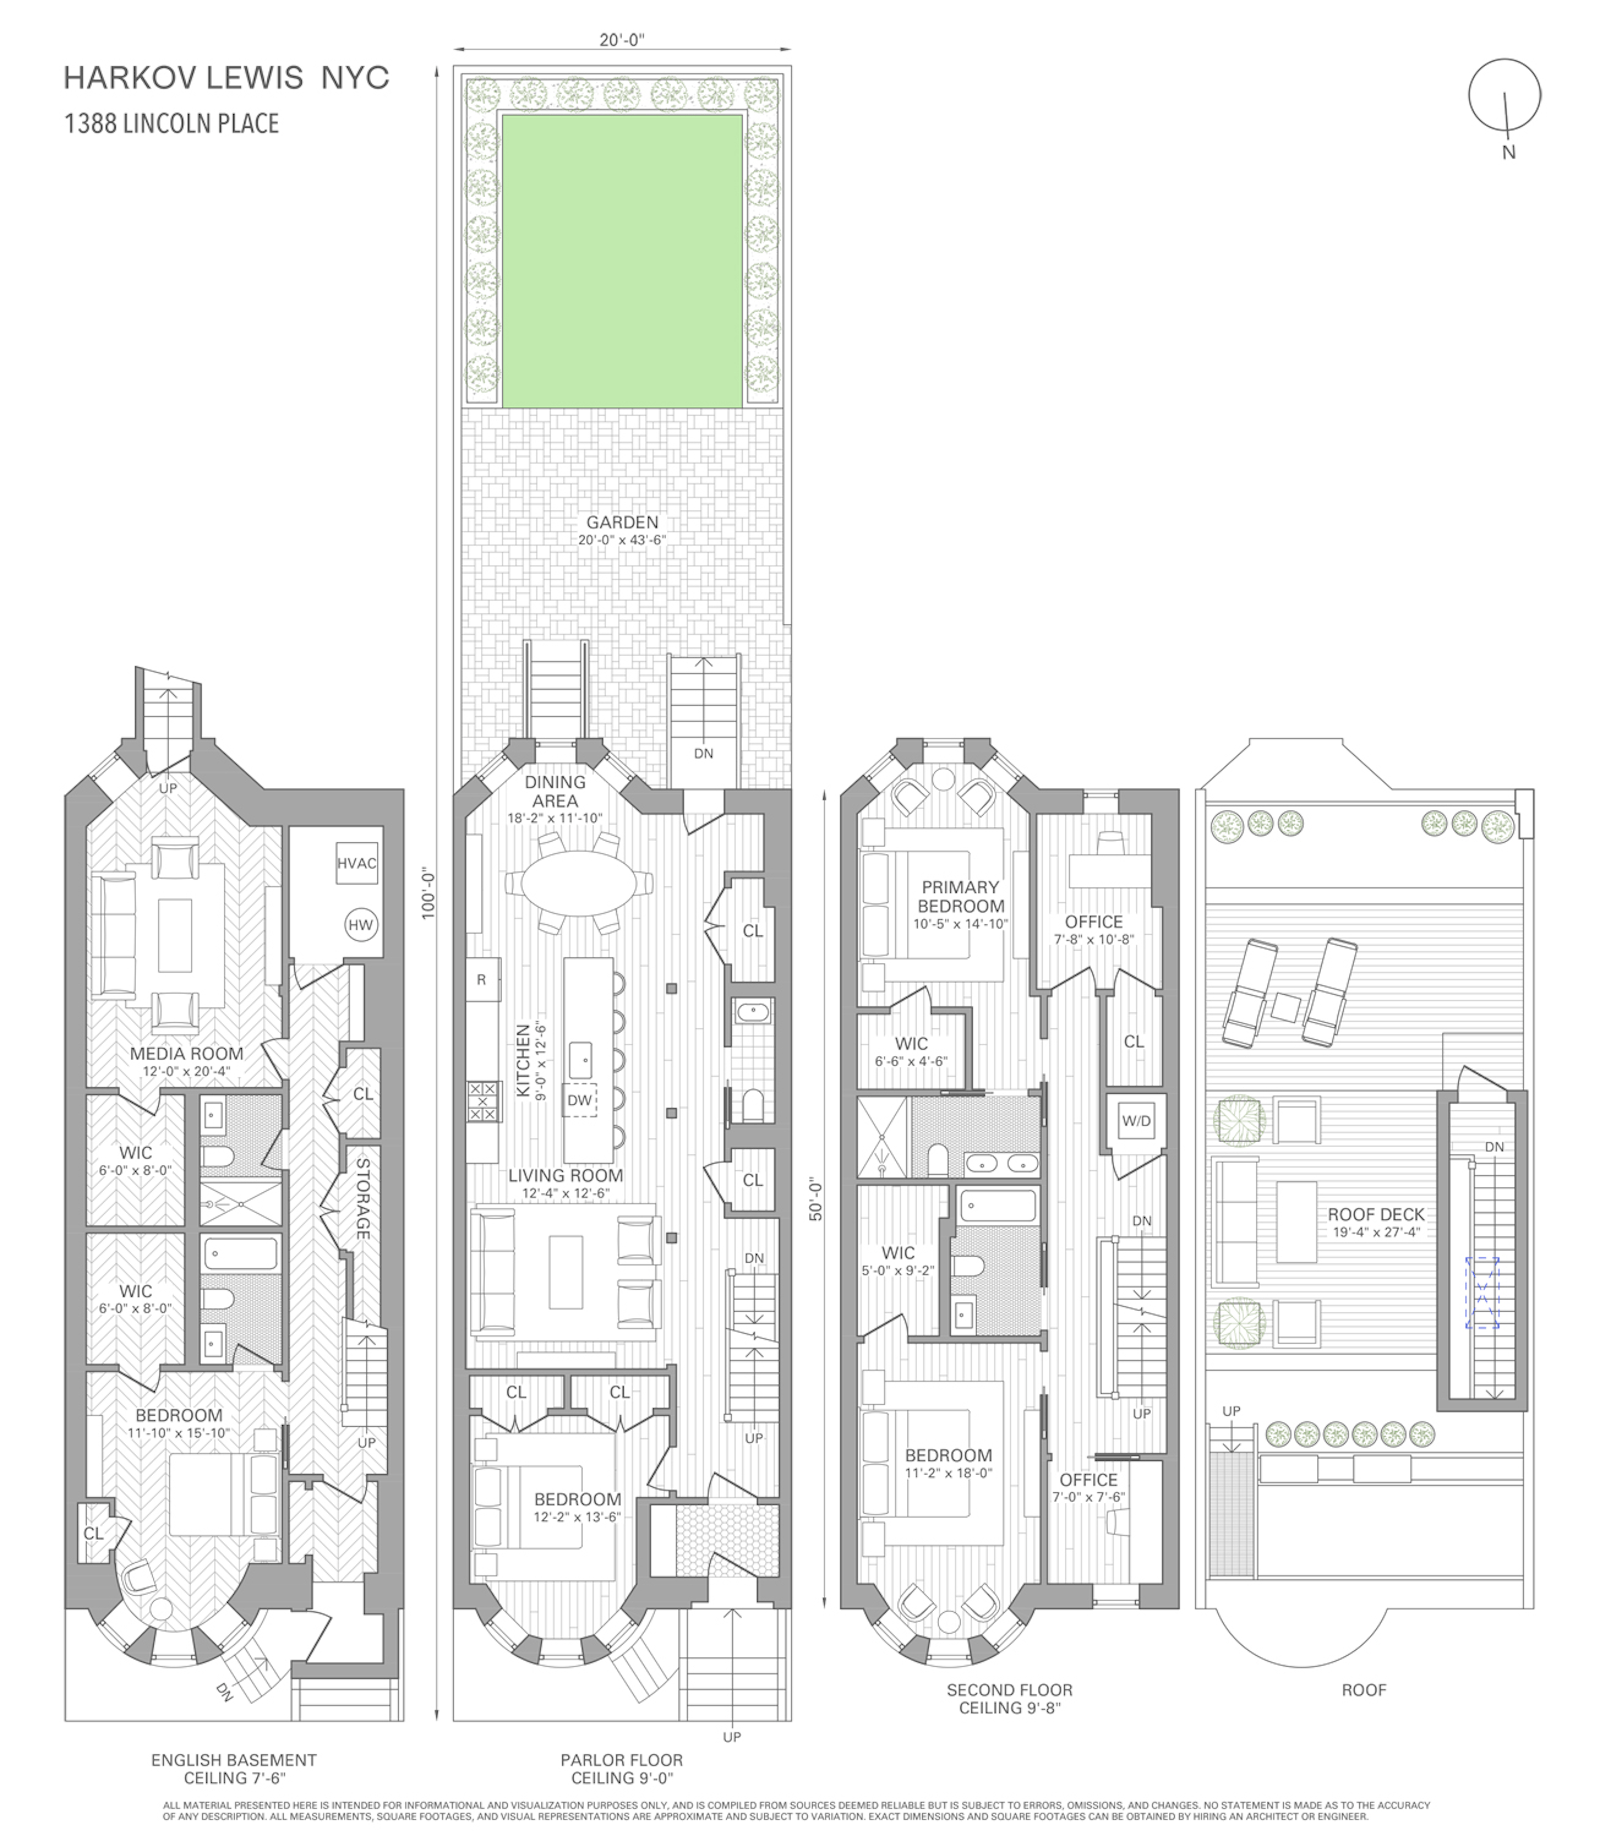 Floorplan for 1388 Lincoln Place